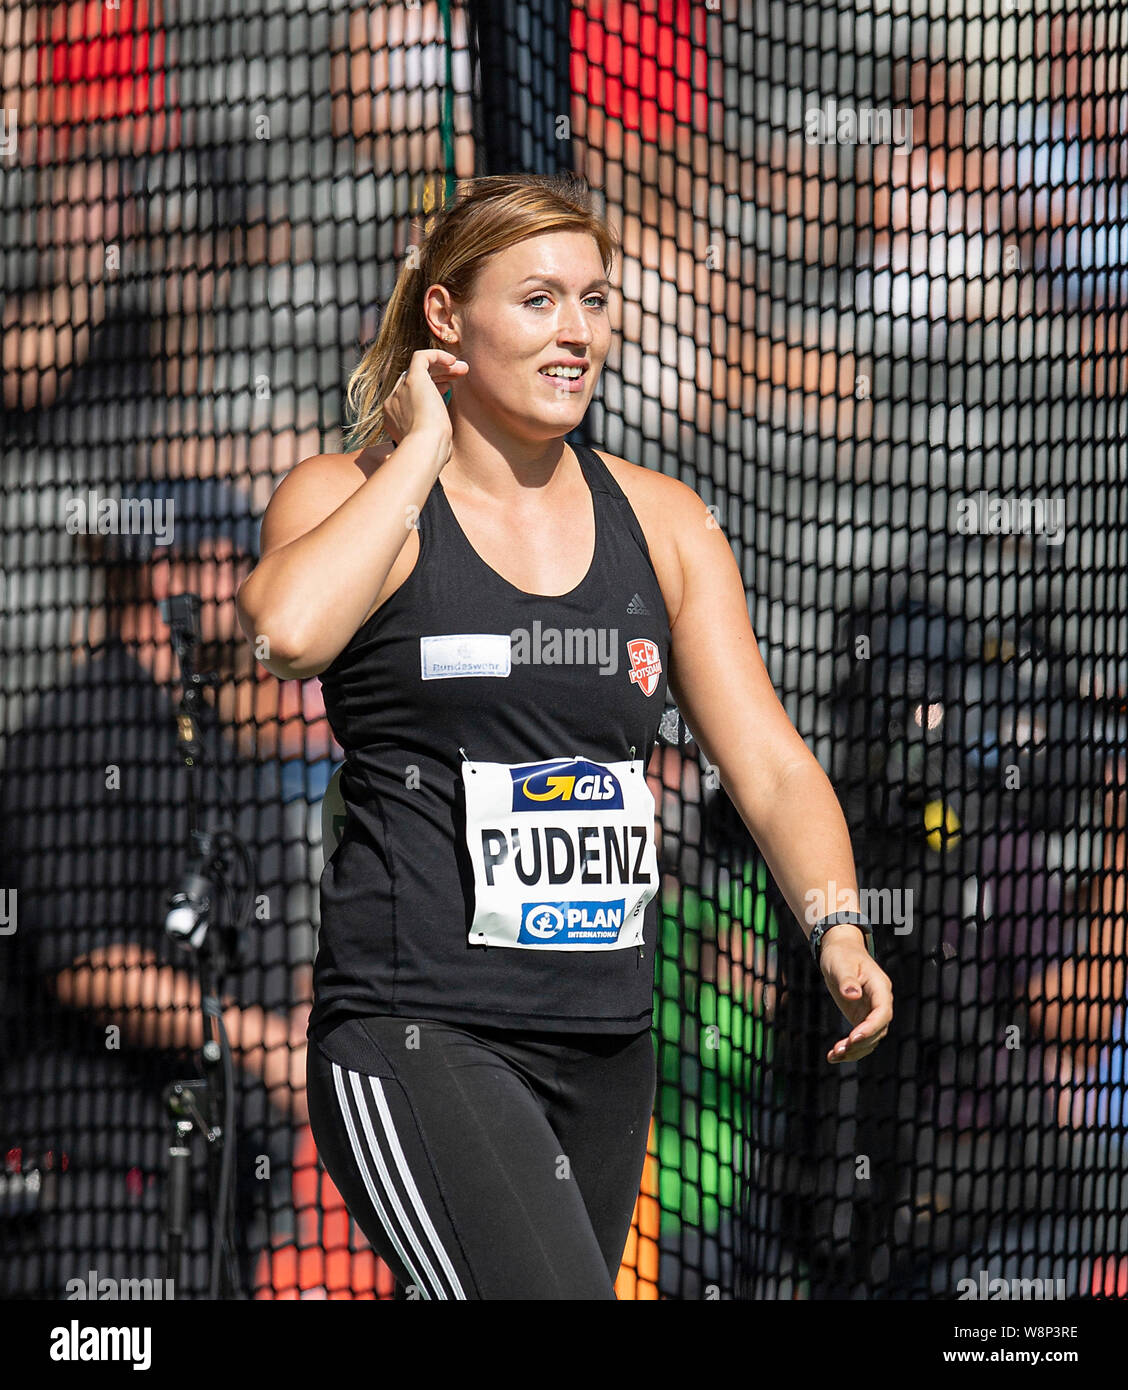 Winner Kristin Pudenz Sc Potsdam 1st Place Women S Final Discus Throw On 04 08 2019 German Athletics Championships 2019 From 03 08 04 08 2019 In Berlin Germany Usage Worldwide Stock Photo Alamy